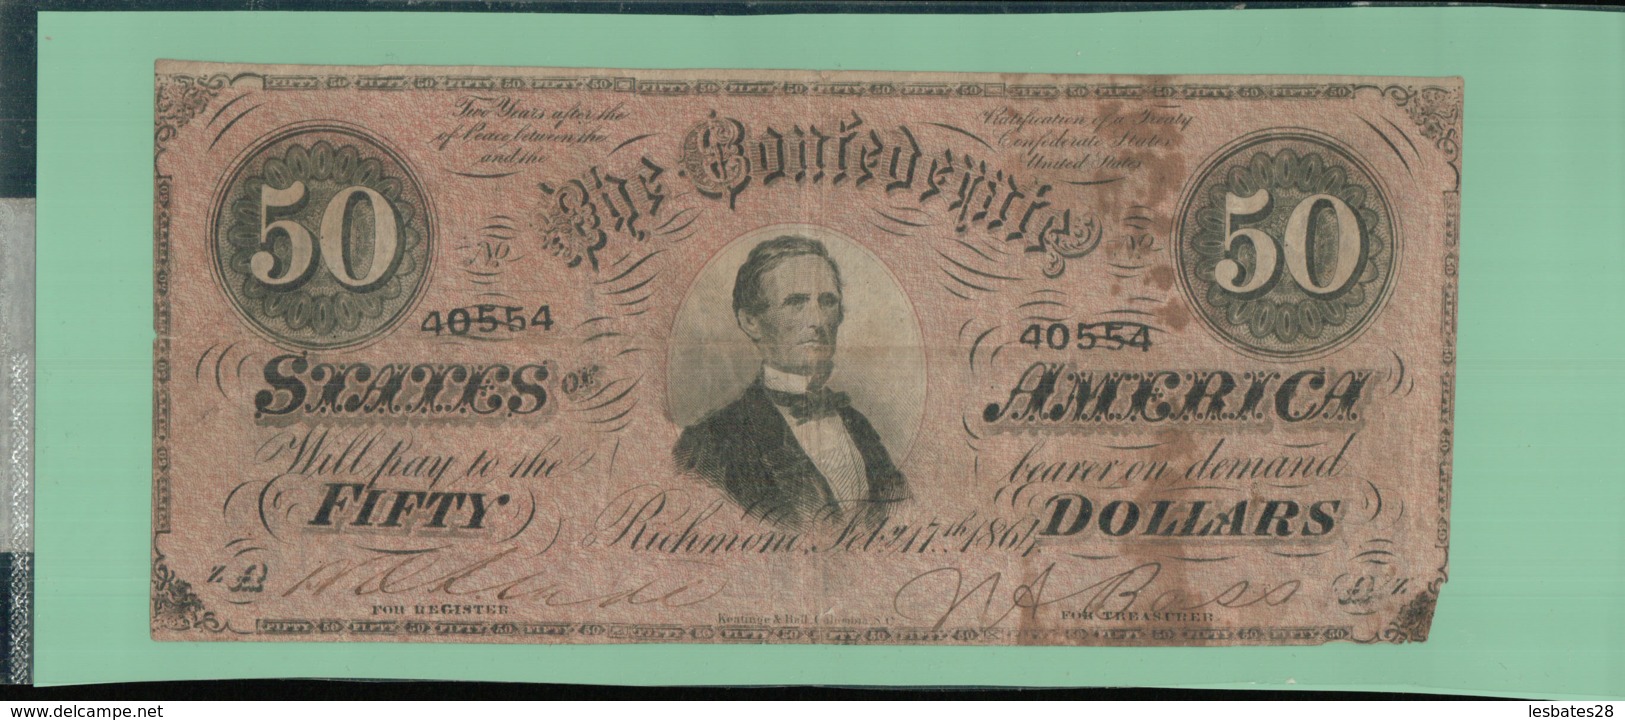 BILLET BANQUE  ATAT-UNIS 50 Dollars 1864 The Confederate States Of America 1864-02-17  -sept  2019  Alb Bil - Confederate Currency (1861-1864)